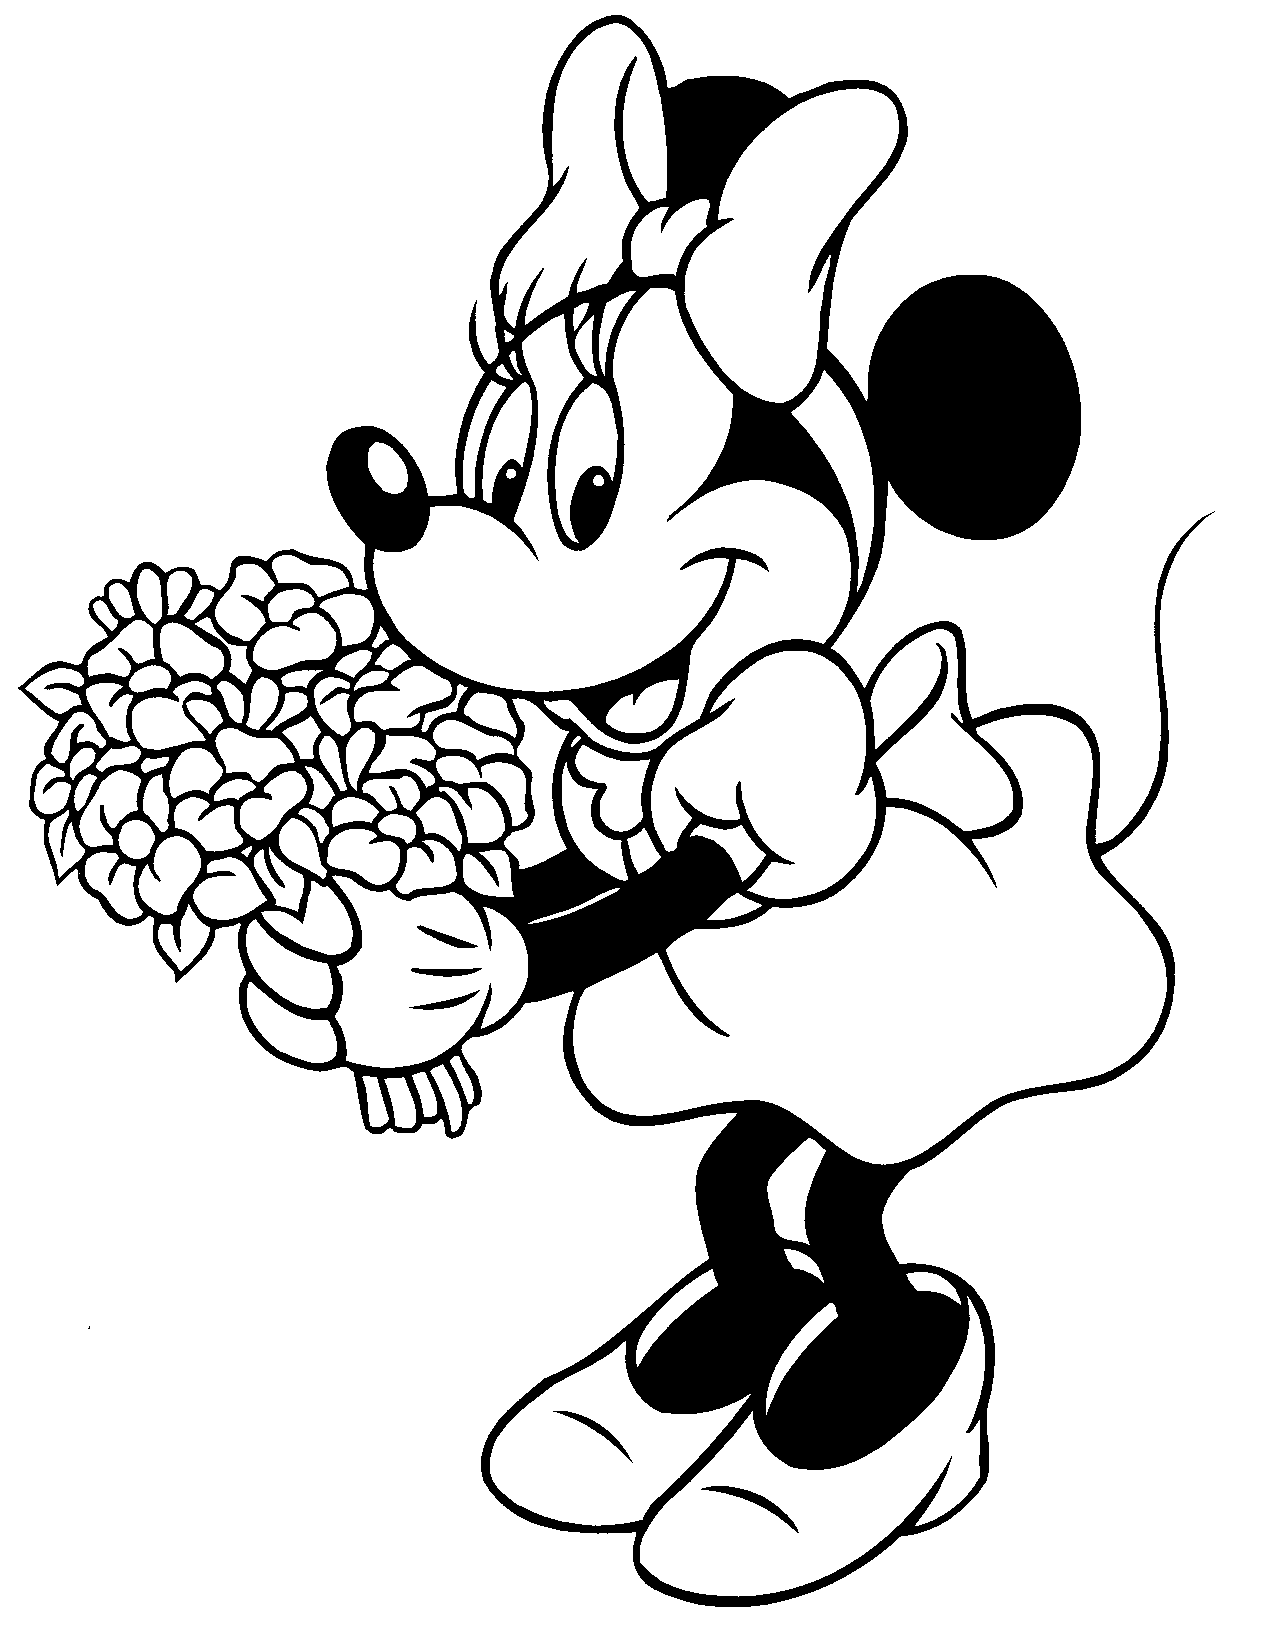 Mickey mouse  black and white minnie mouse black and white clipart clipartfox